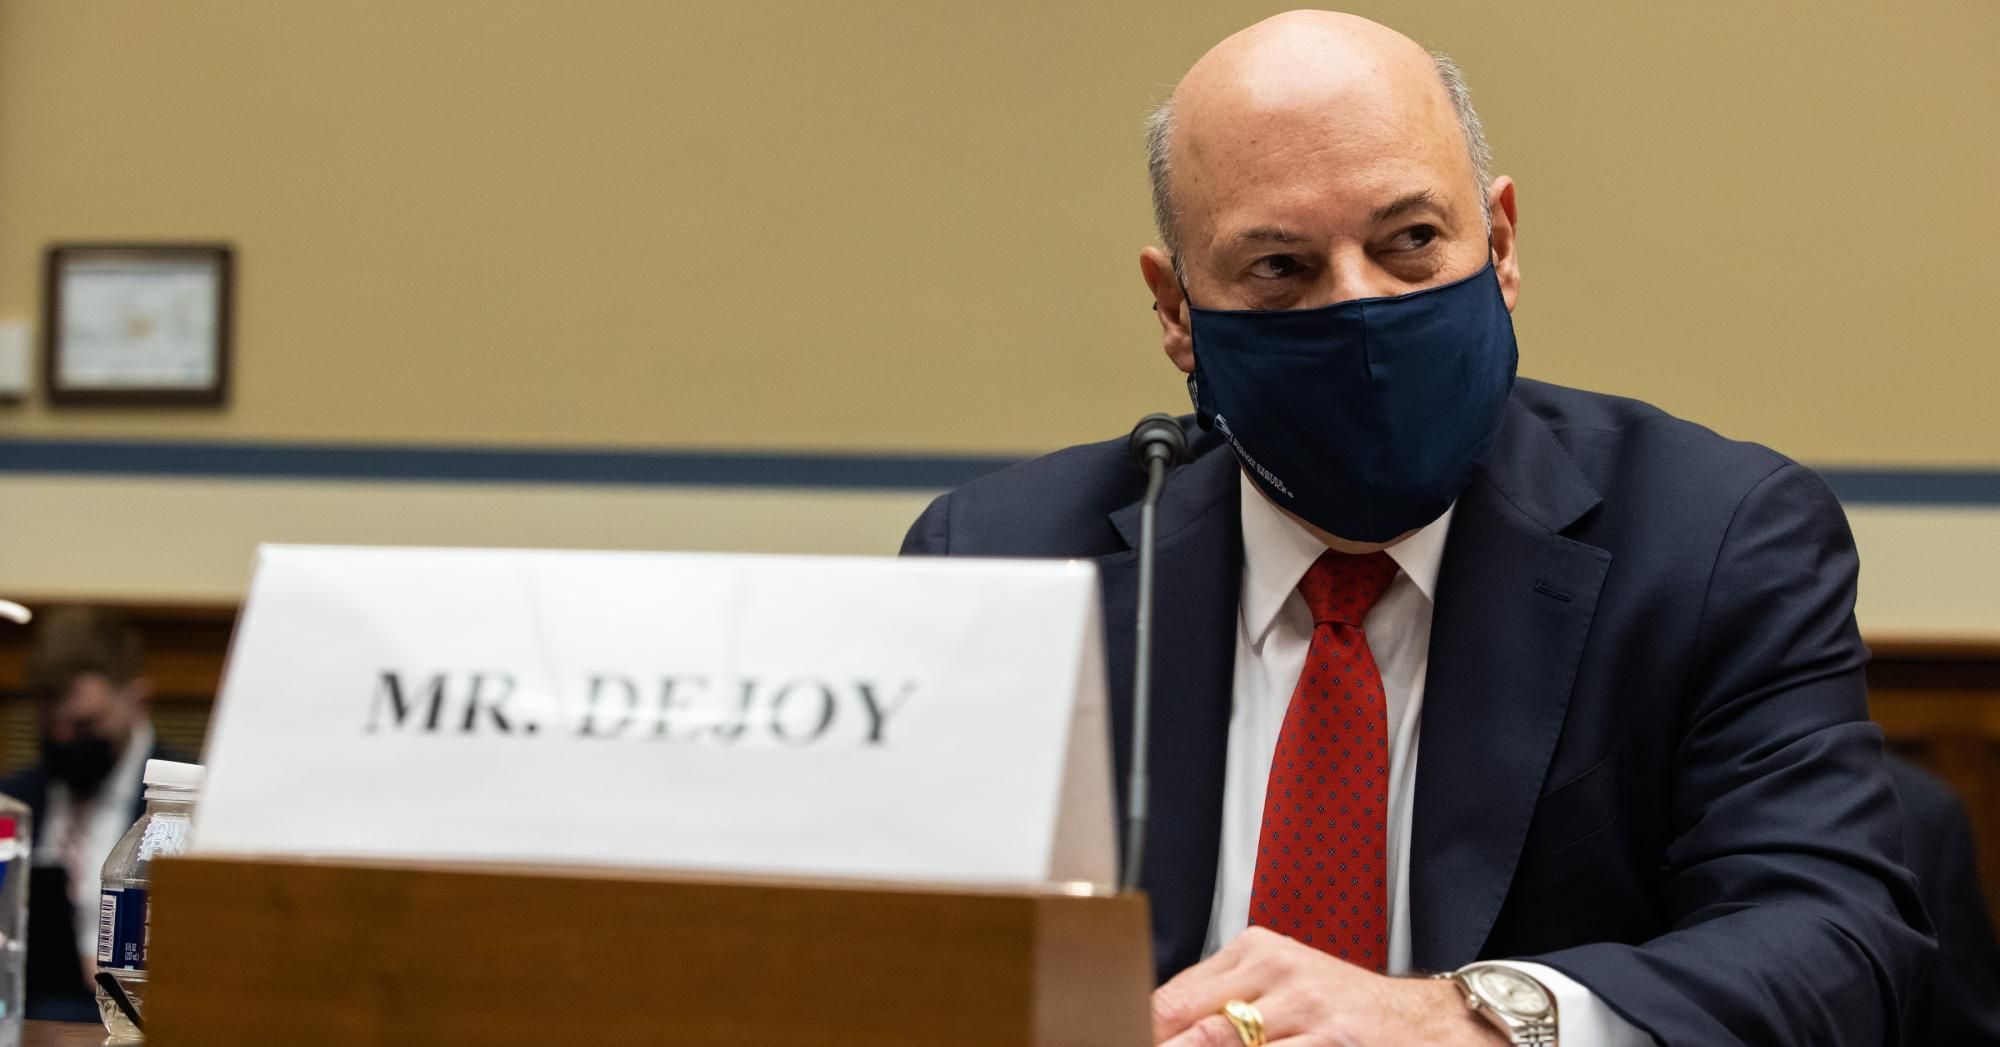 Postmaster General Louis Dejoy speaks during a House Committee on Oversight and Reform hearing on February 24, 2021 on Capitol Hill in Washington, D.C.